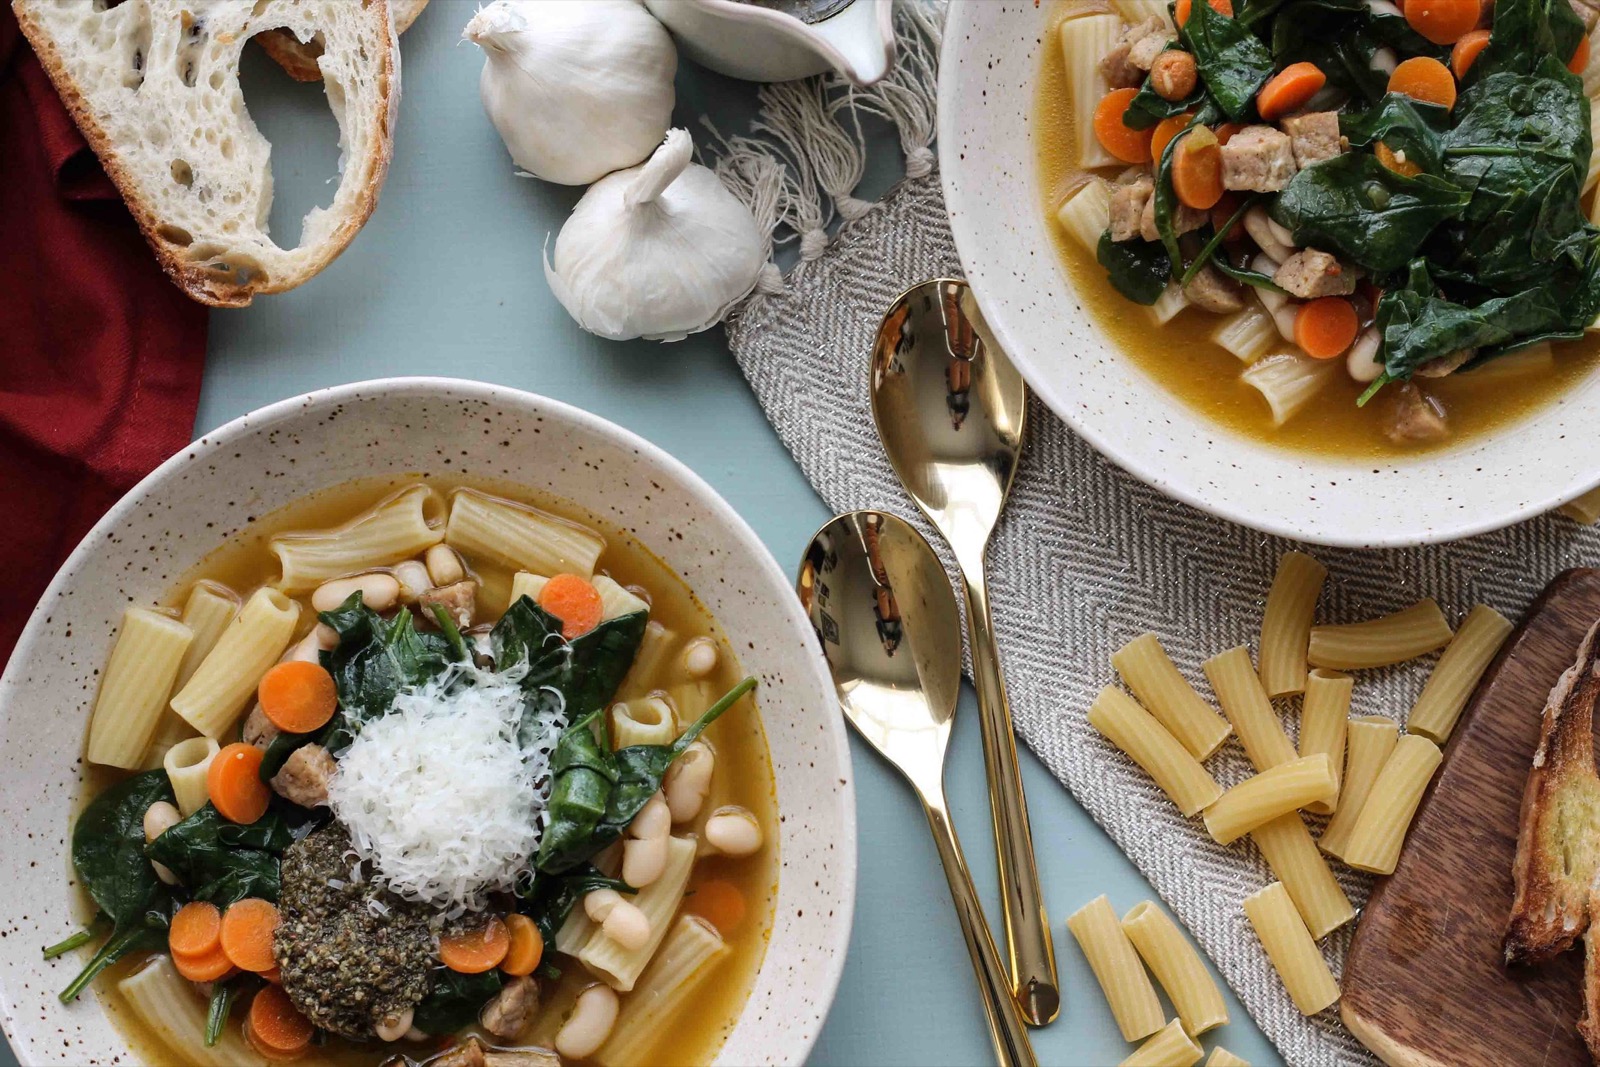 What Winter Comfort Food Are You? Winter meal comfort food